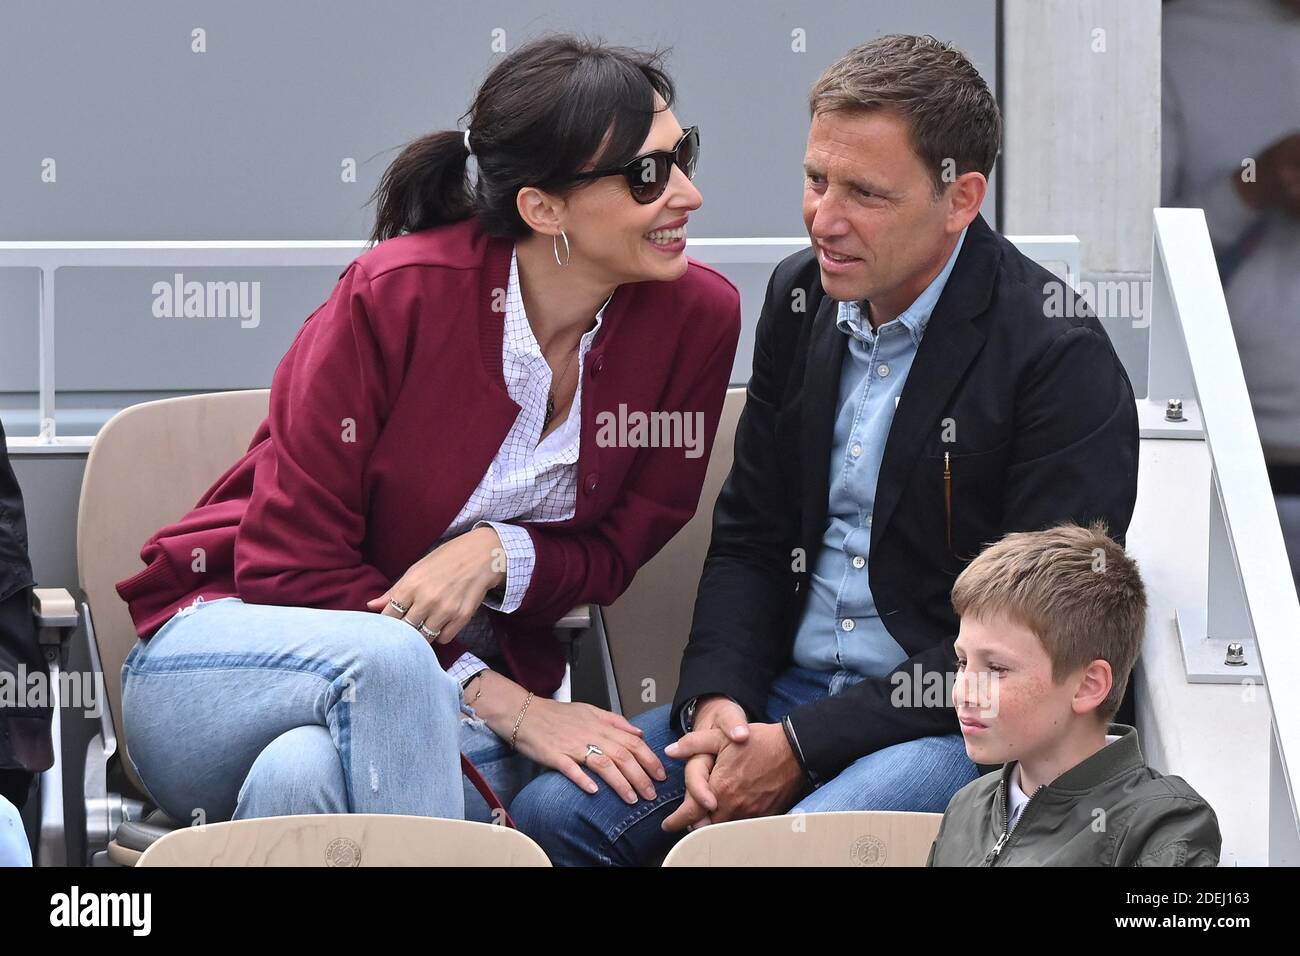 Geraldine Maillet and Daniel Riolo attend the 2019 French Tennis Open - Day  Four at Roland Garros on May 29, 2019 in Paris, France. Photo by Laurent  Zabulon/ABACAPRESS.COM Stock Photo - Alamy